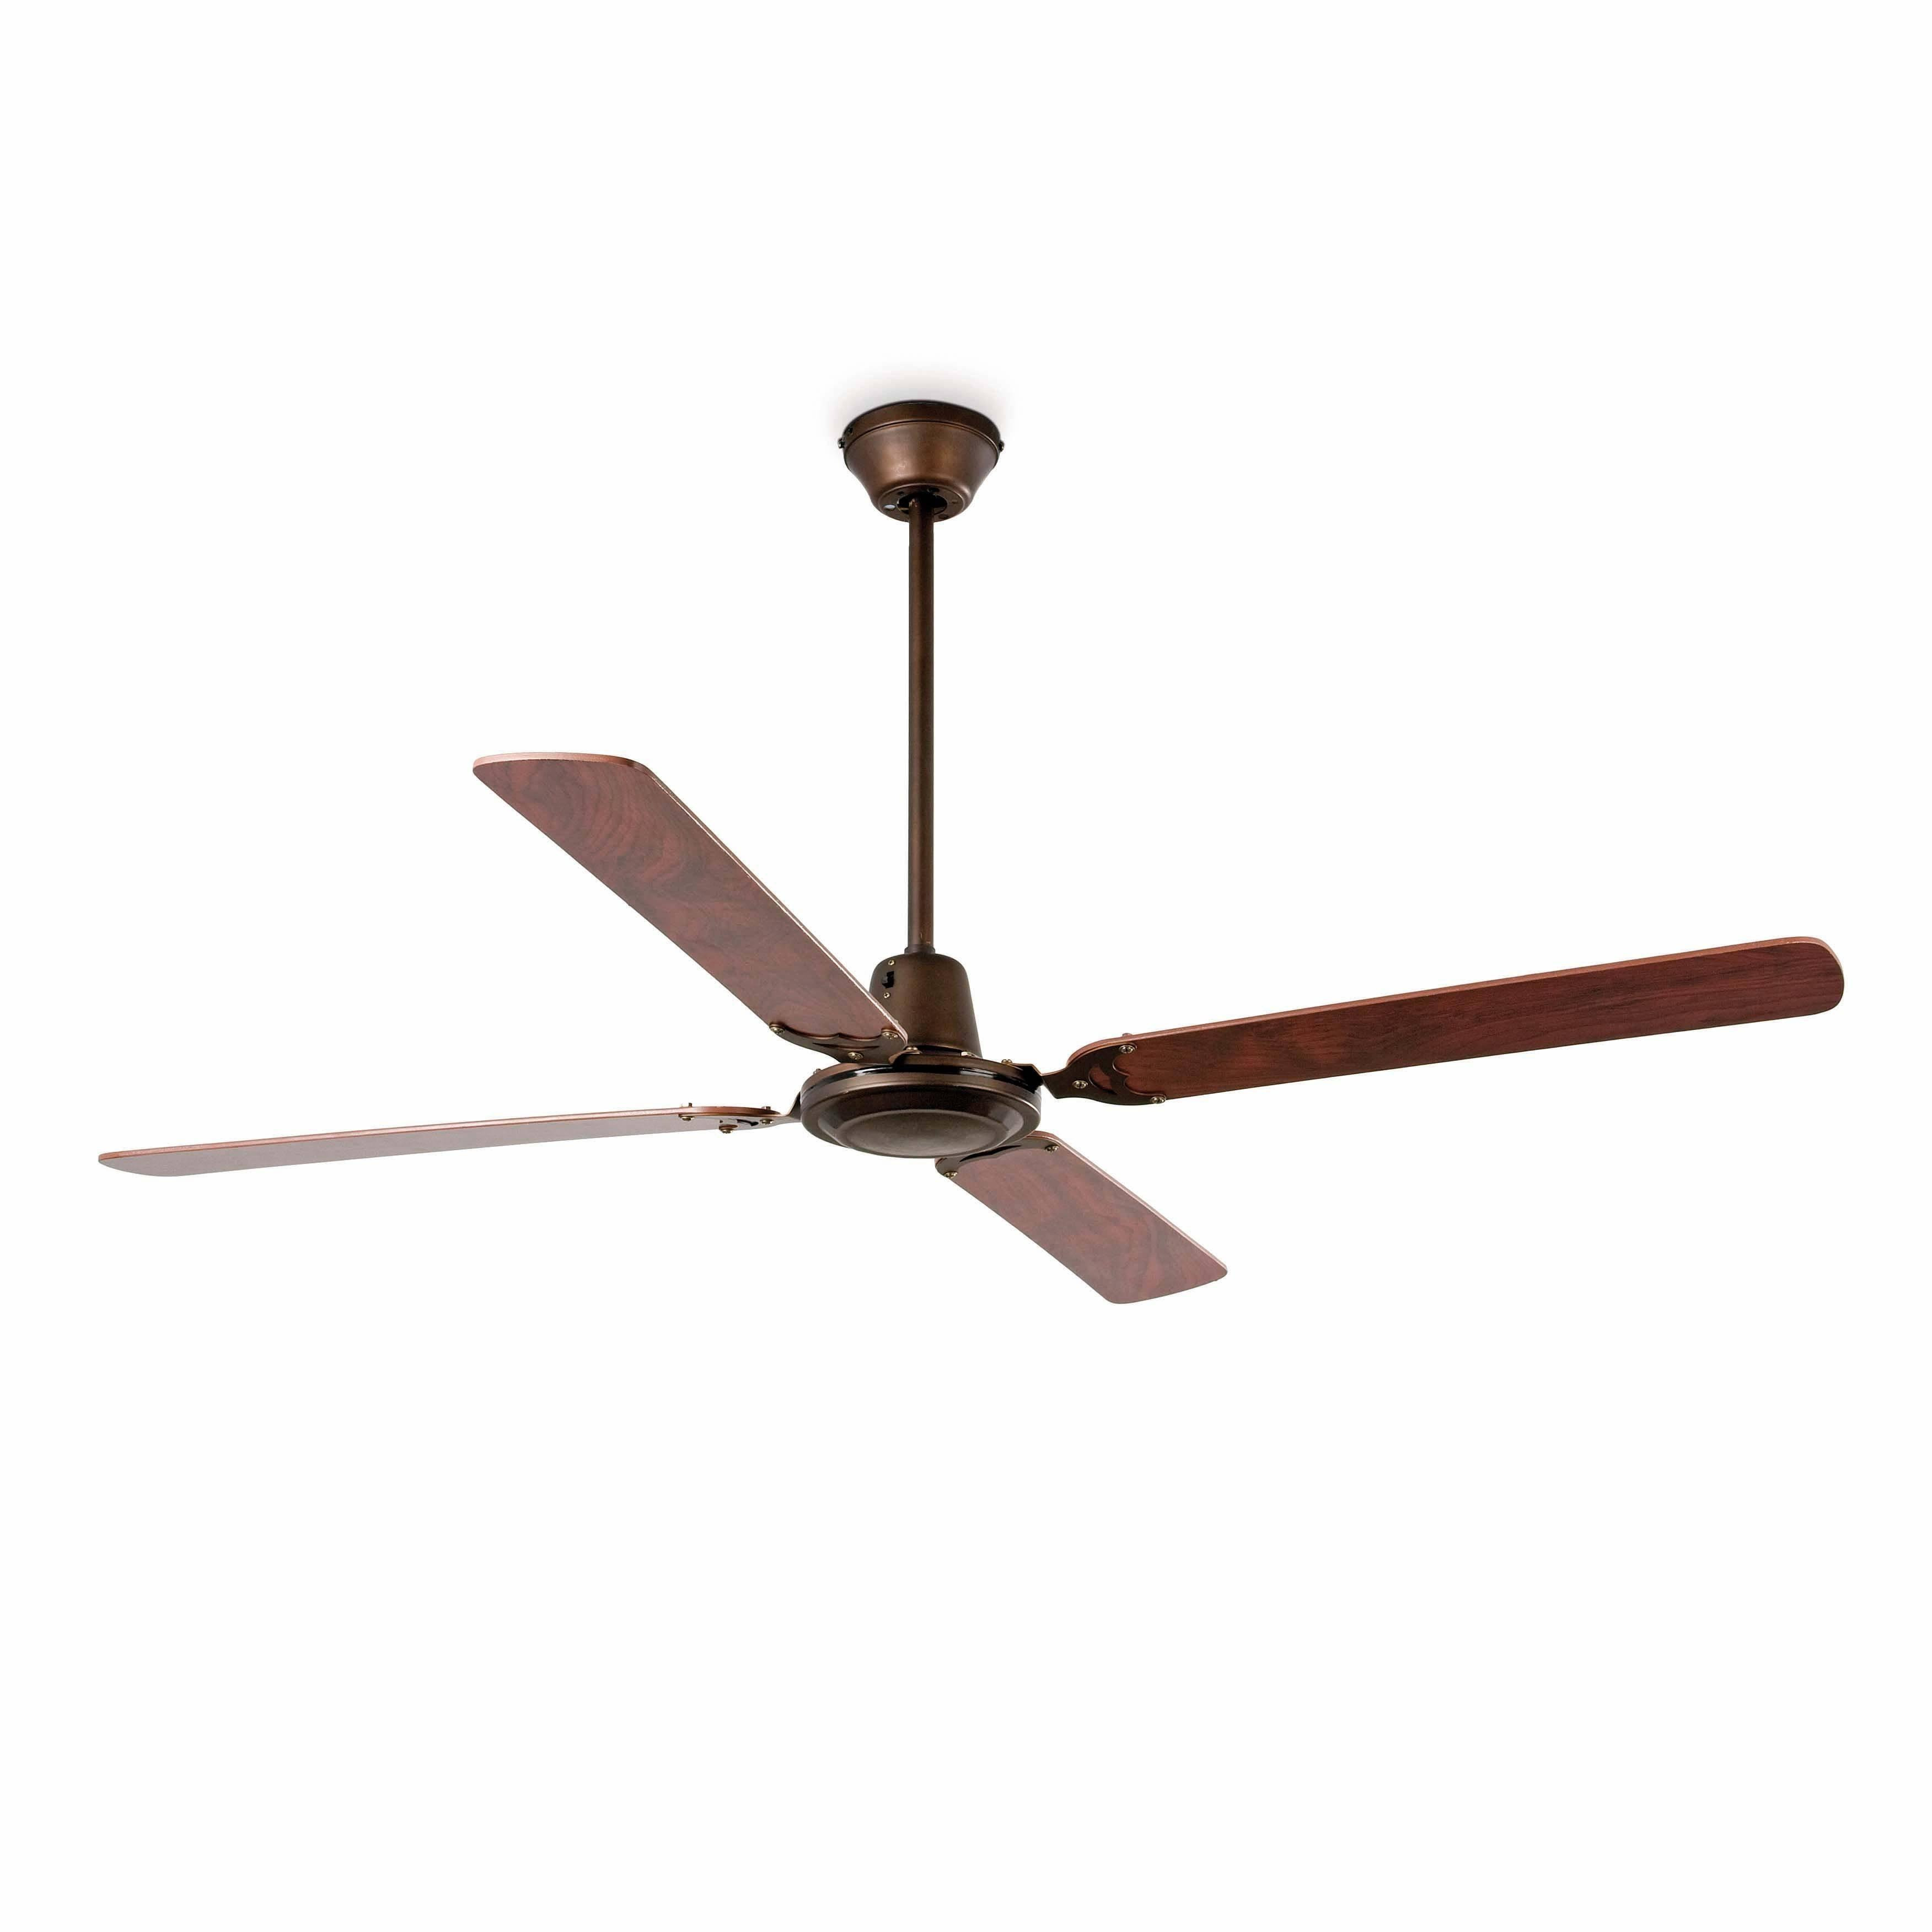 Malvinas Large Ceiling Fan Without Light Wood Dark Brown - image 1